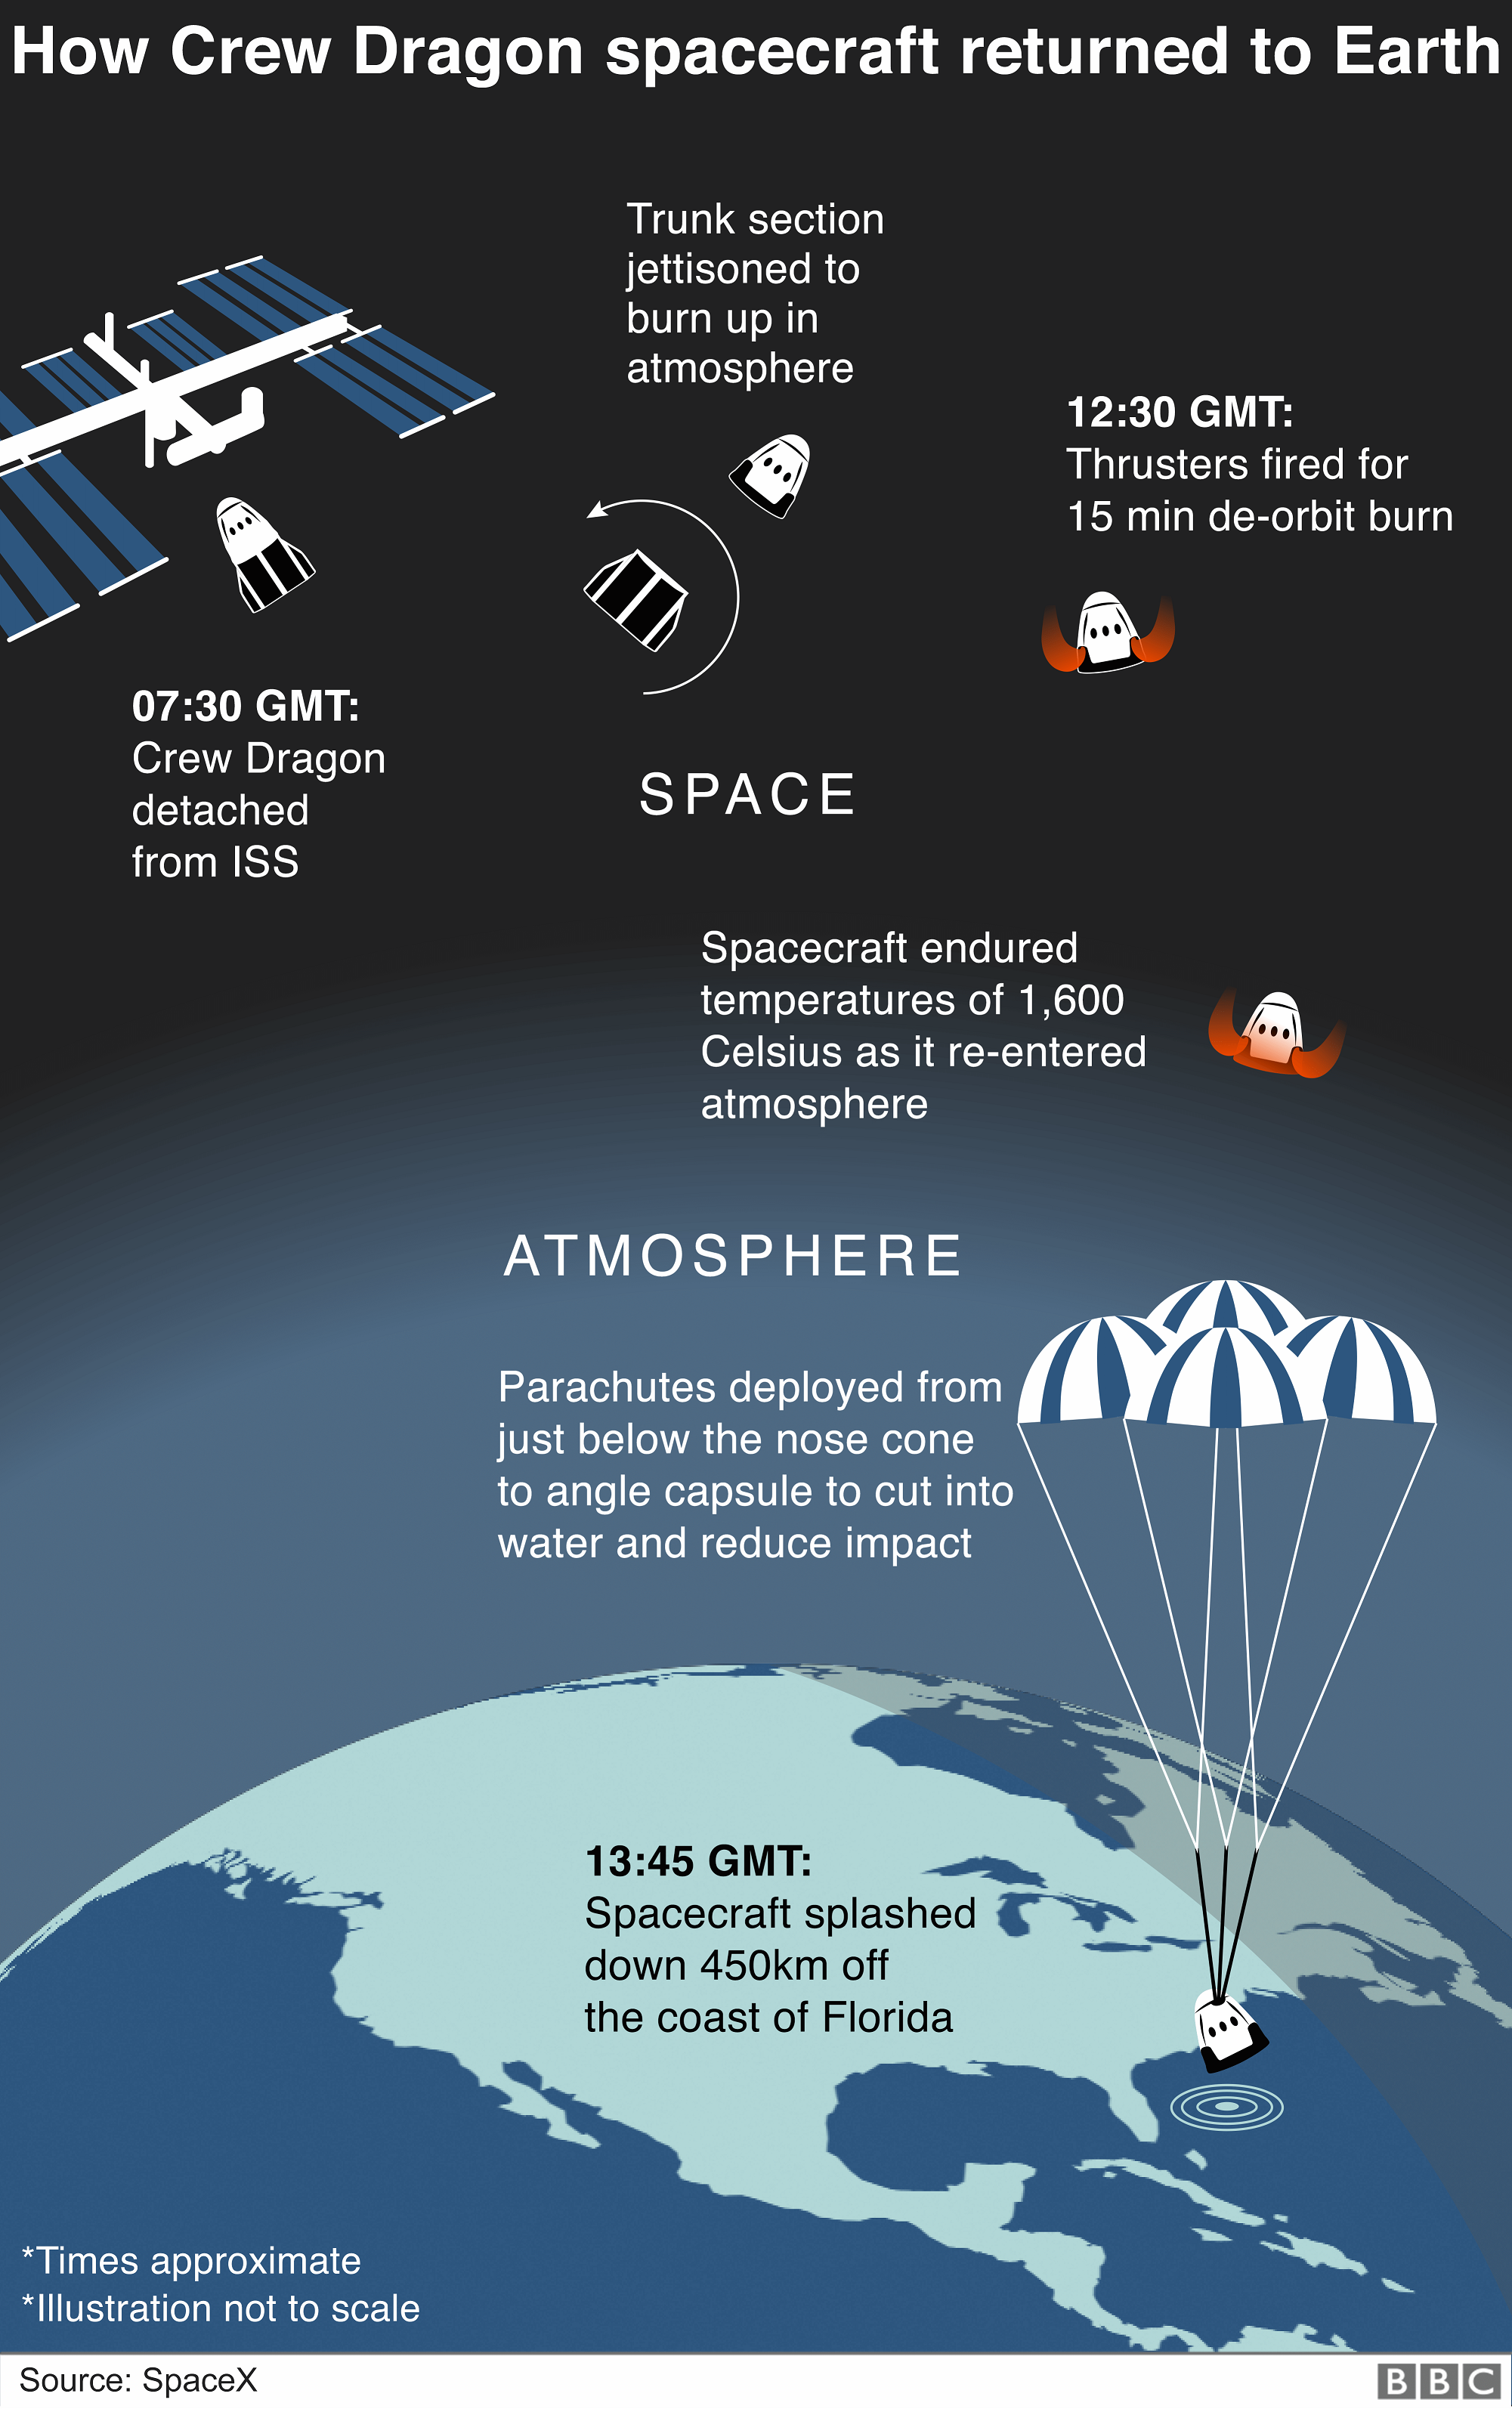 Graphic: How the Dragon spacecraft returned to Earth